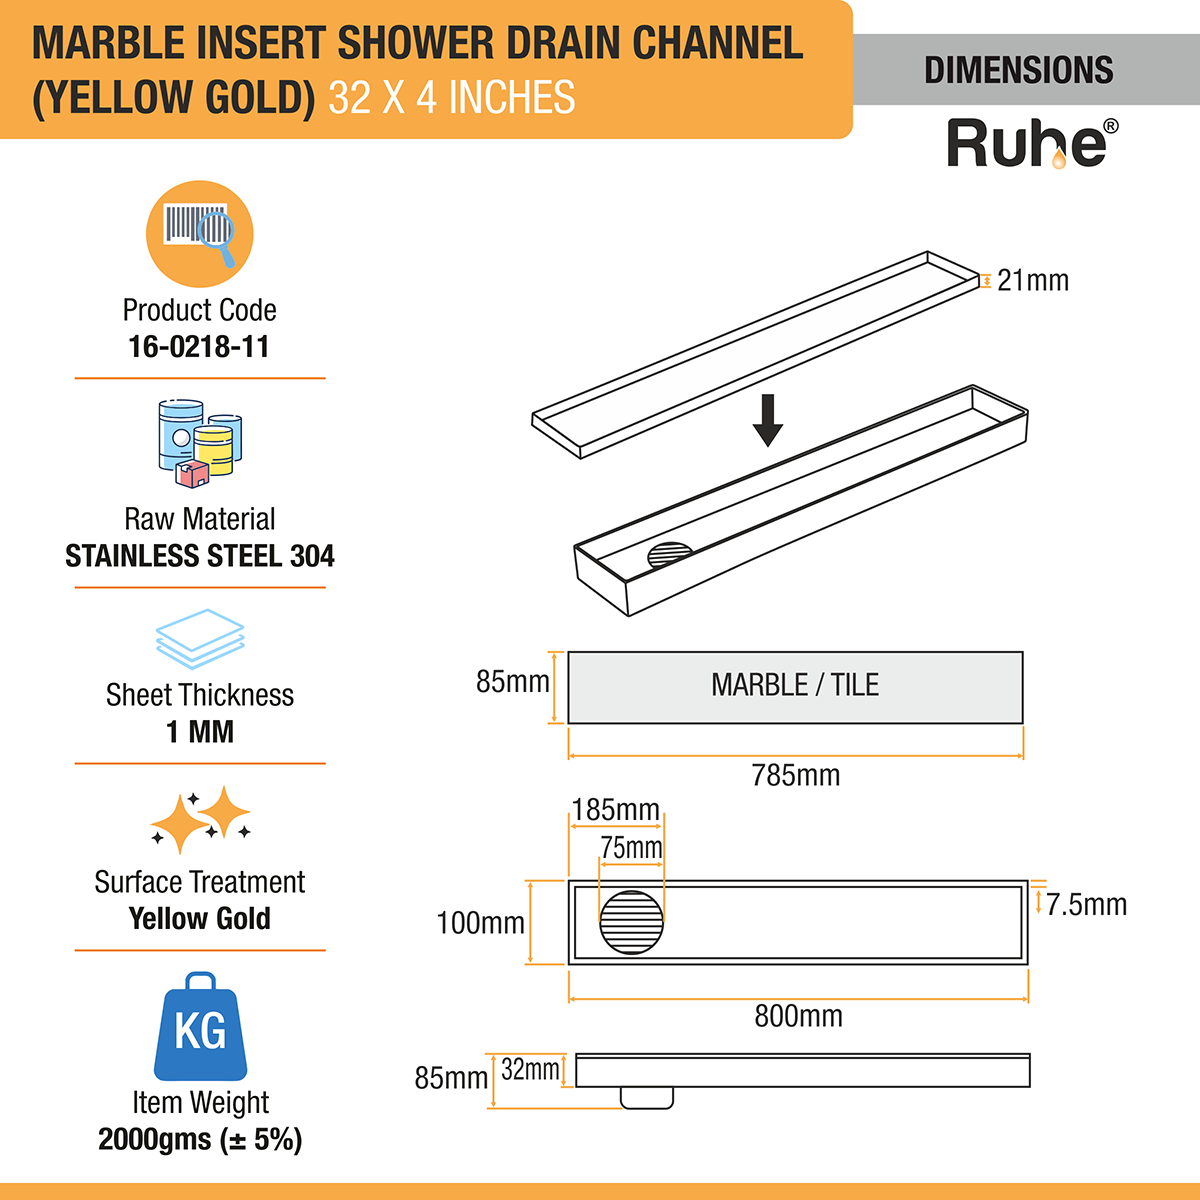 Marble Insert Shower Drain Channel (32 x 4 Inches) YELLOW GOLD PVD Coated dimensions and sizes